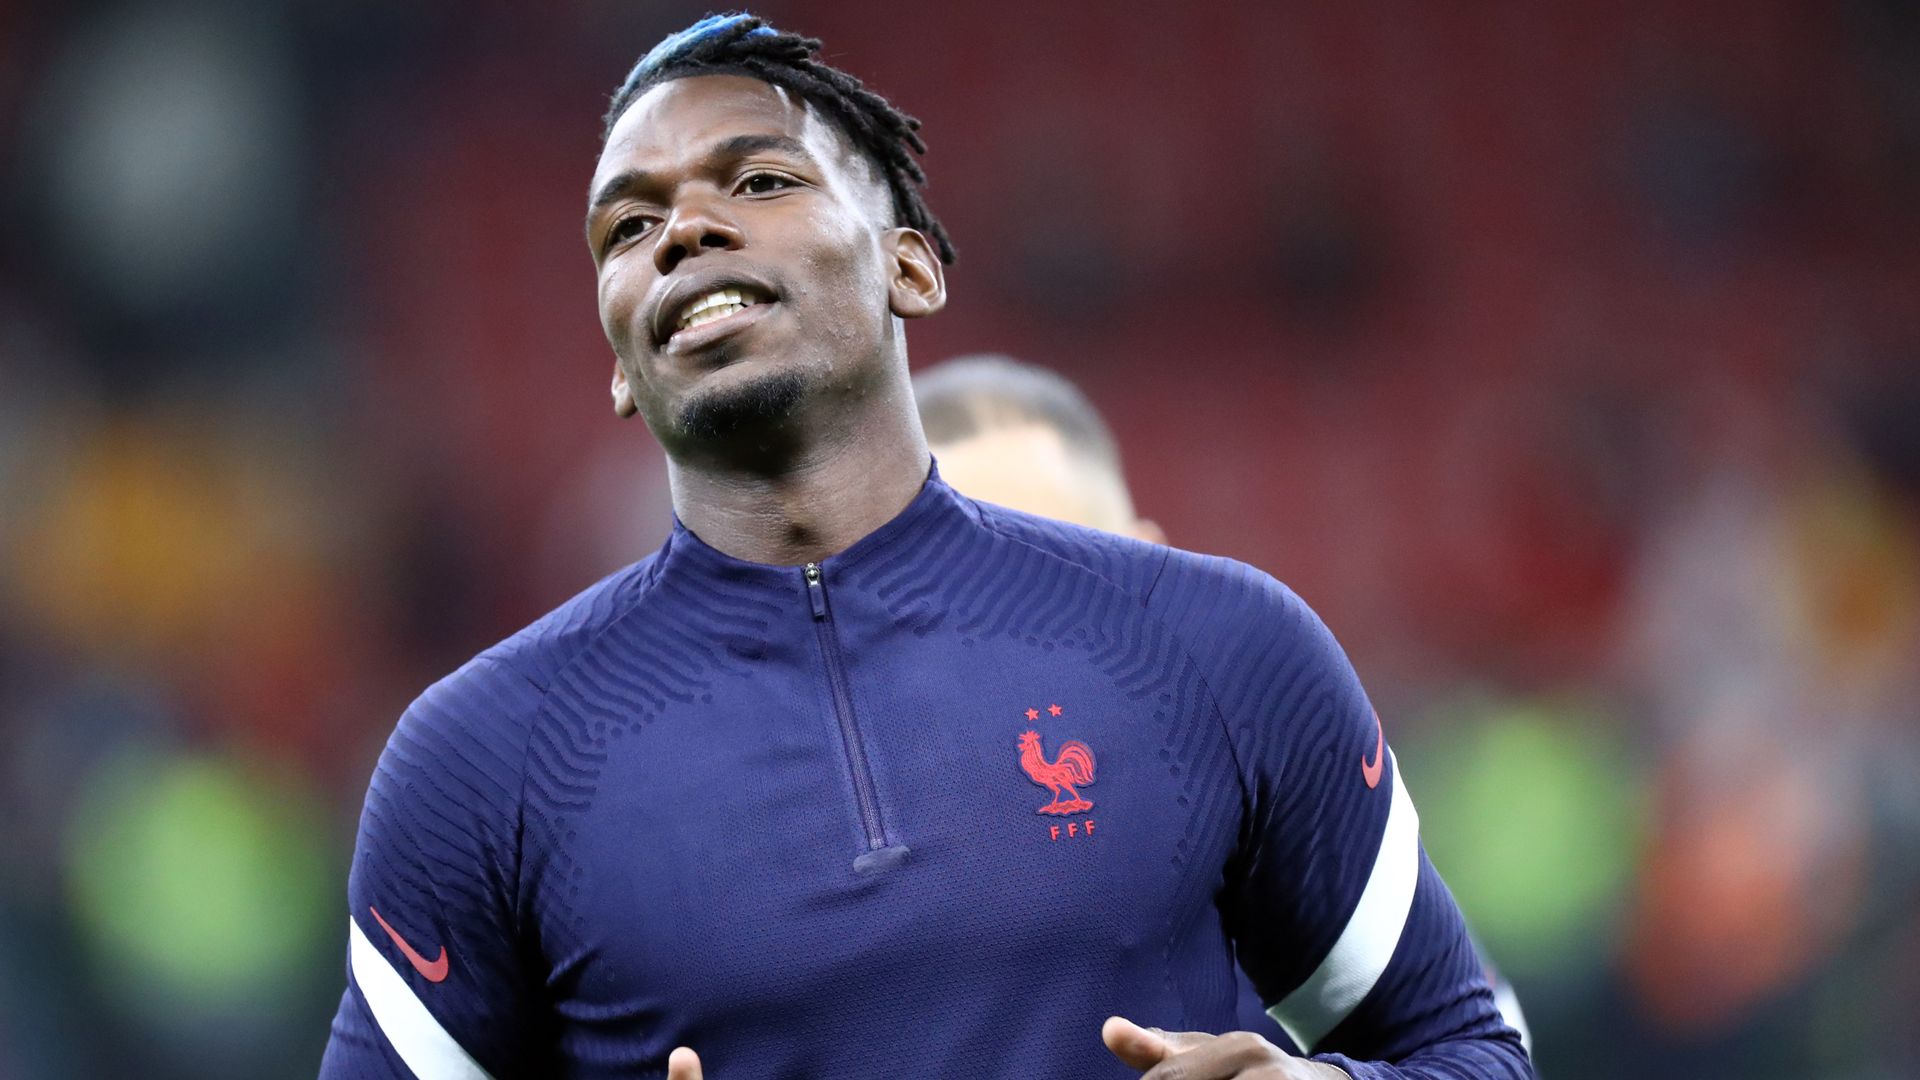 Injured Pogba out of France's World Cup qualifiers